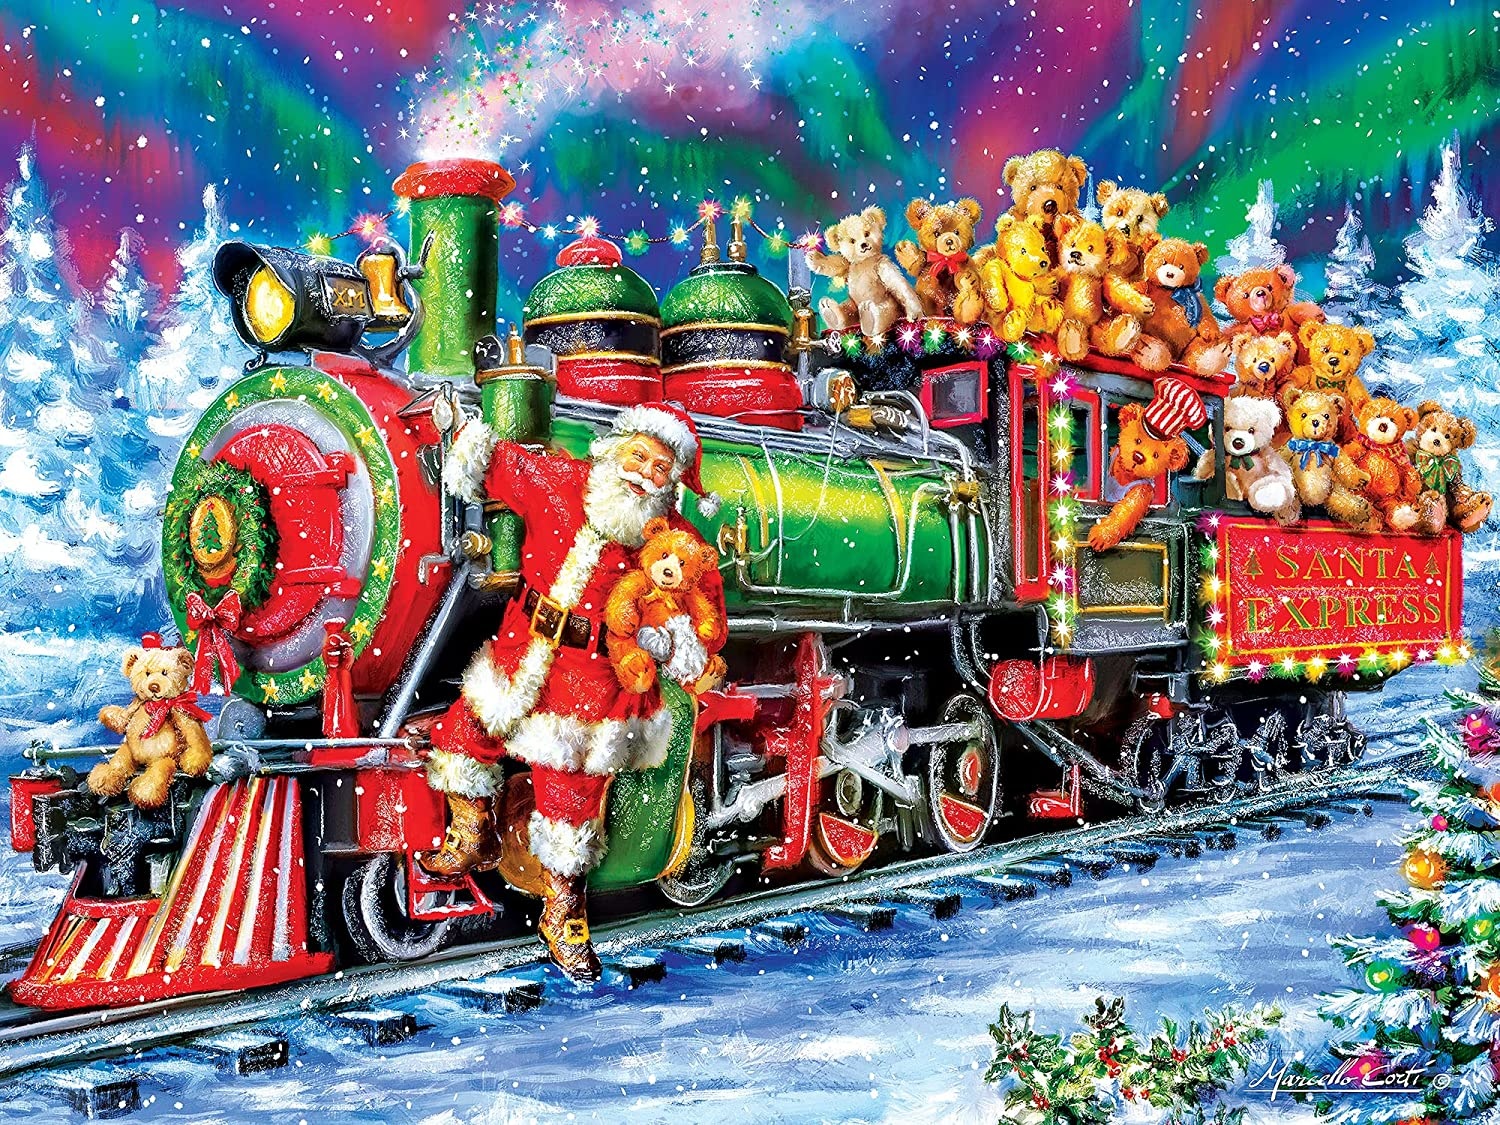 Masterpiece Holiday - North Pole Delivery 300pc EzGrip Puzzle